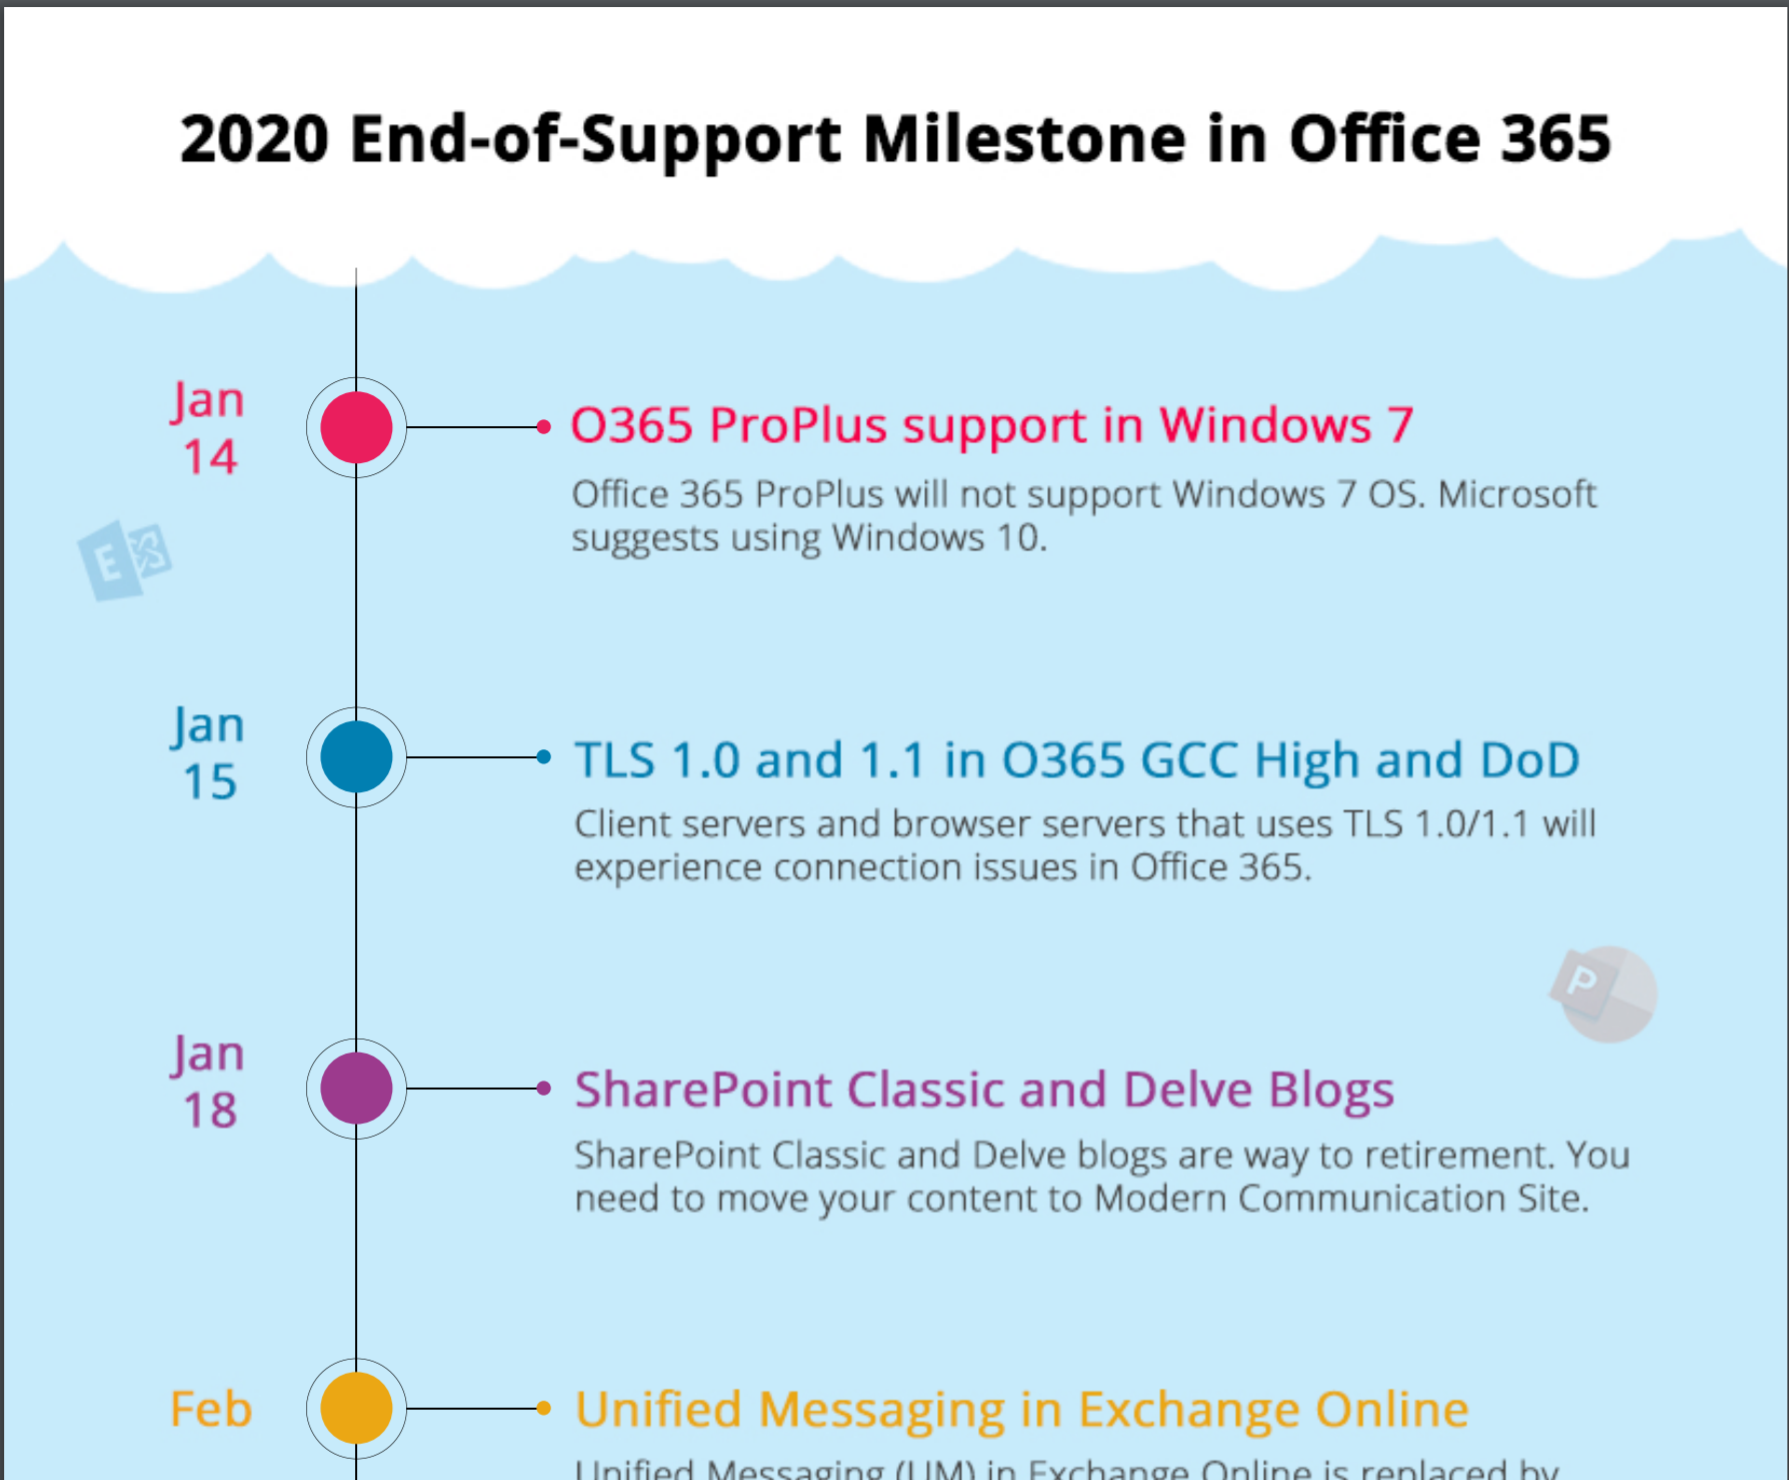 Be Prepared for 2020 End-of-Support Milestones in Office 365 - Microsoft  Community Hub